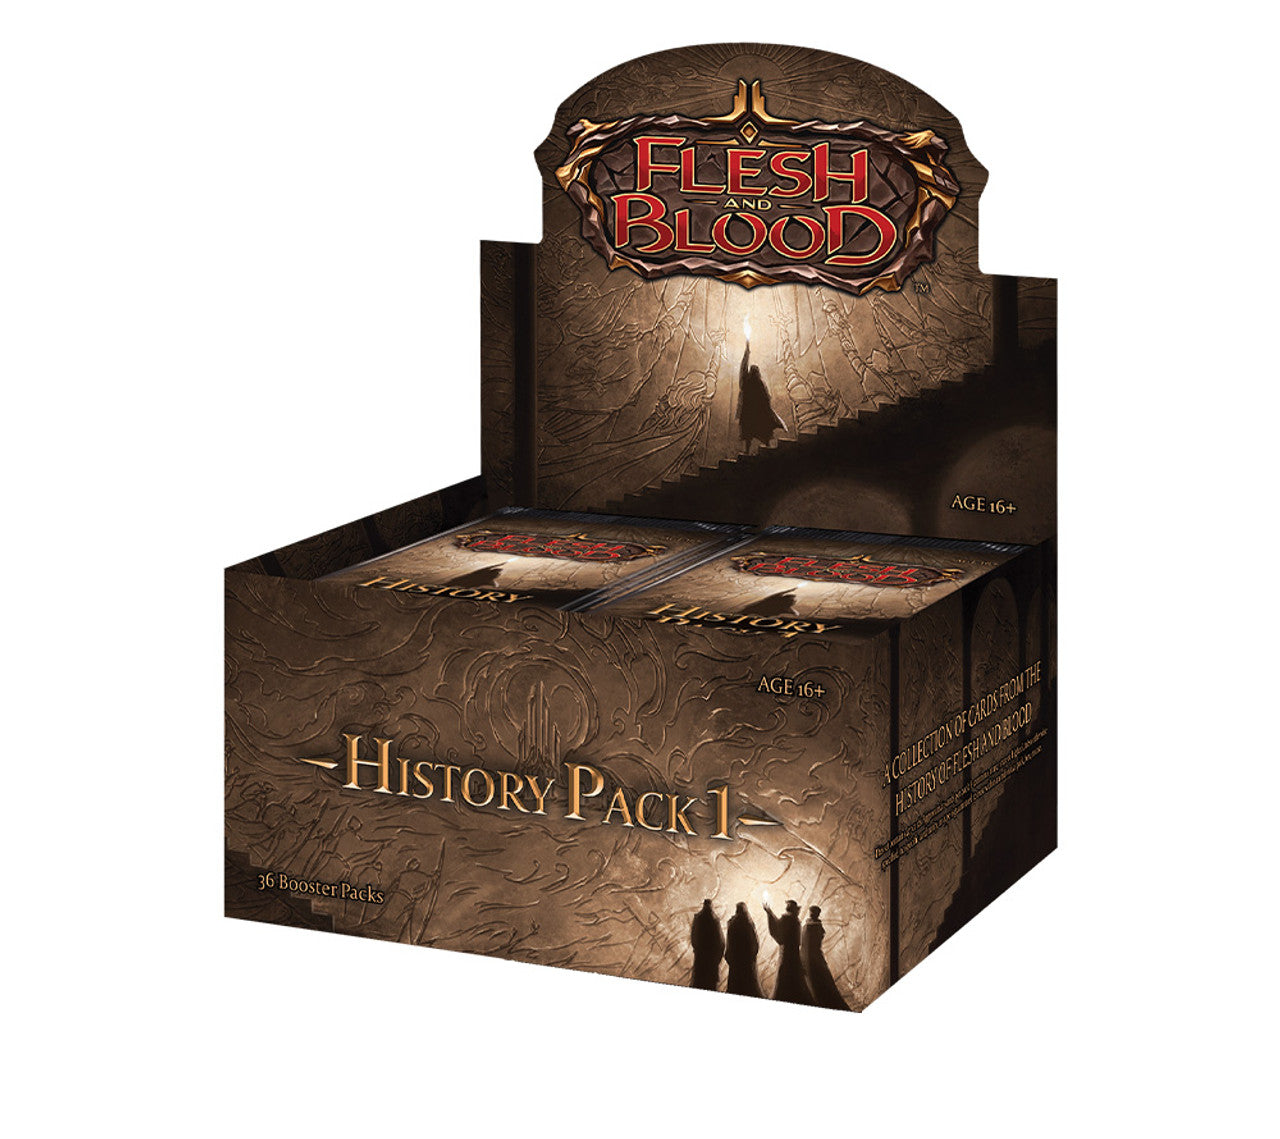 Flesh And Blood - History Pack 1 - Booster Pack (10 cards) - 0